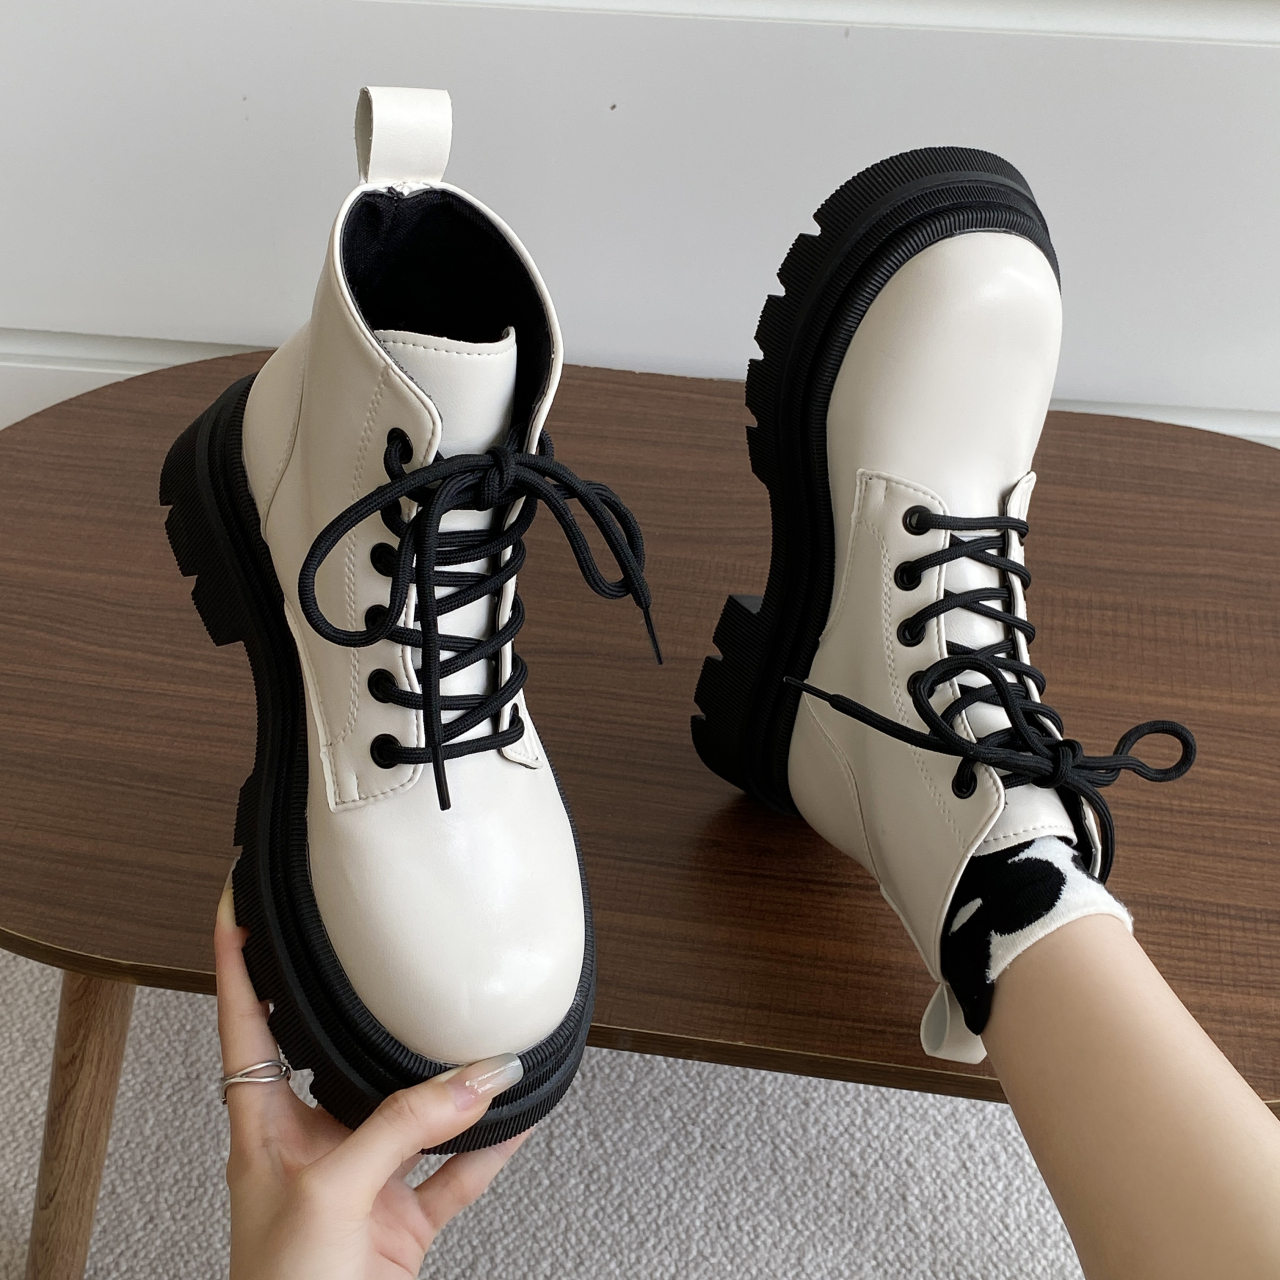 Chunky Platform Combat Boots For Women Autumn Winter Pu Leather Ankle Booties Women Punk Thick Bottom Non Slip Motorcycle Boots